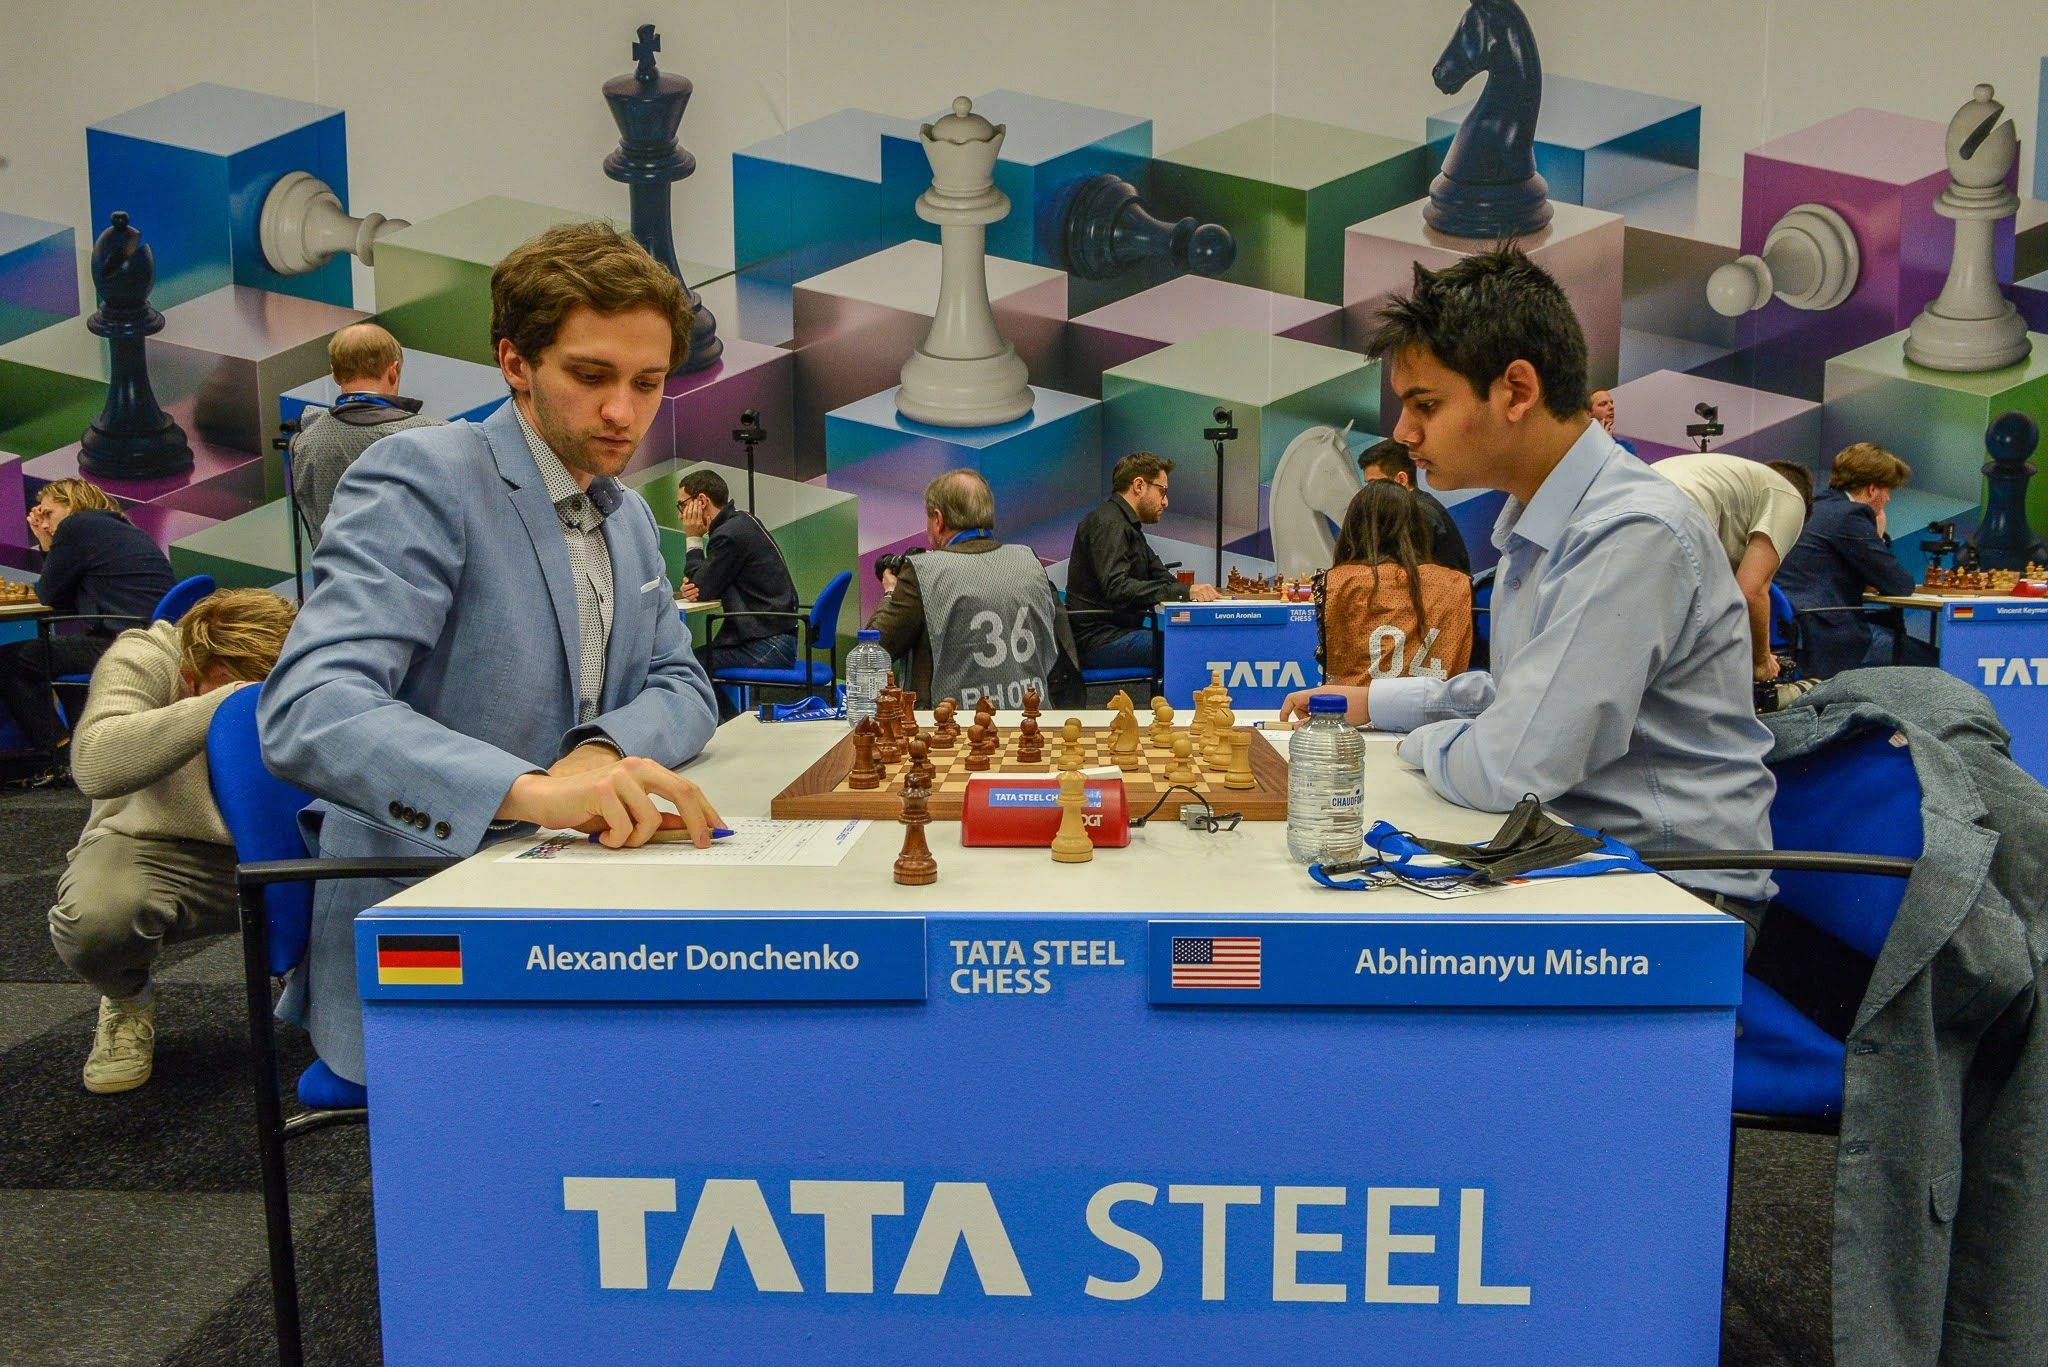 Gukesh D plays out draw with Magnus Carlsen in Rd 9 of Tata Steel